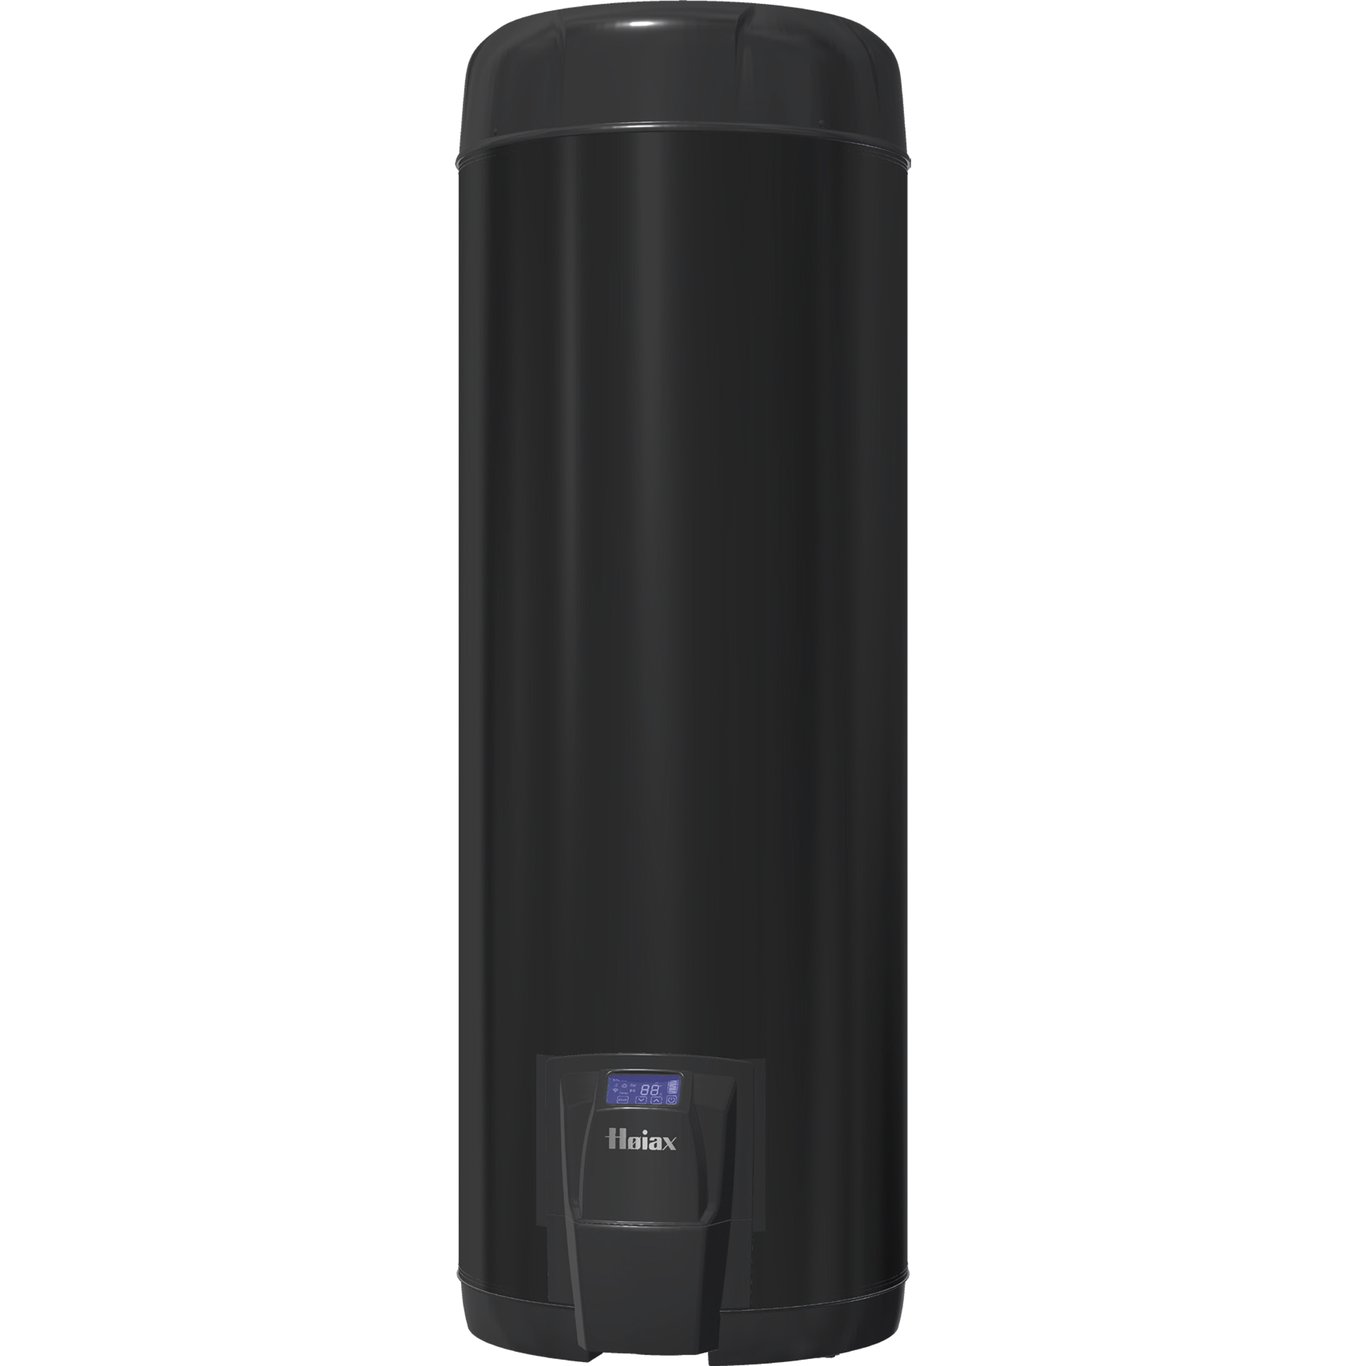 HØIAX CONNECTED 300 SMARTBEREDER 3000W